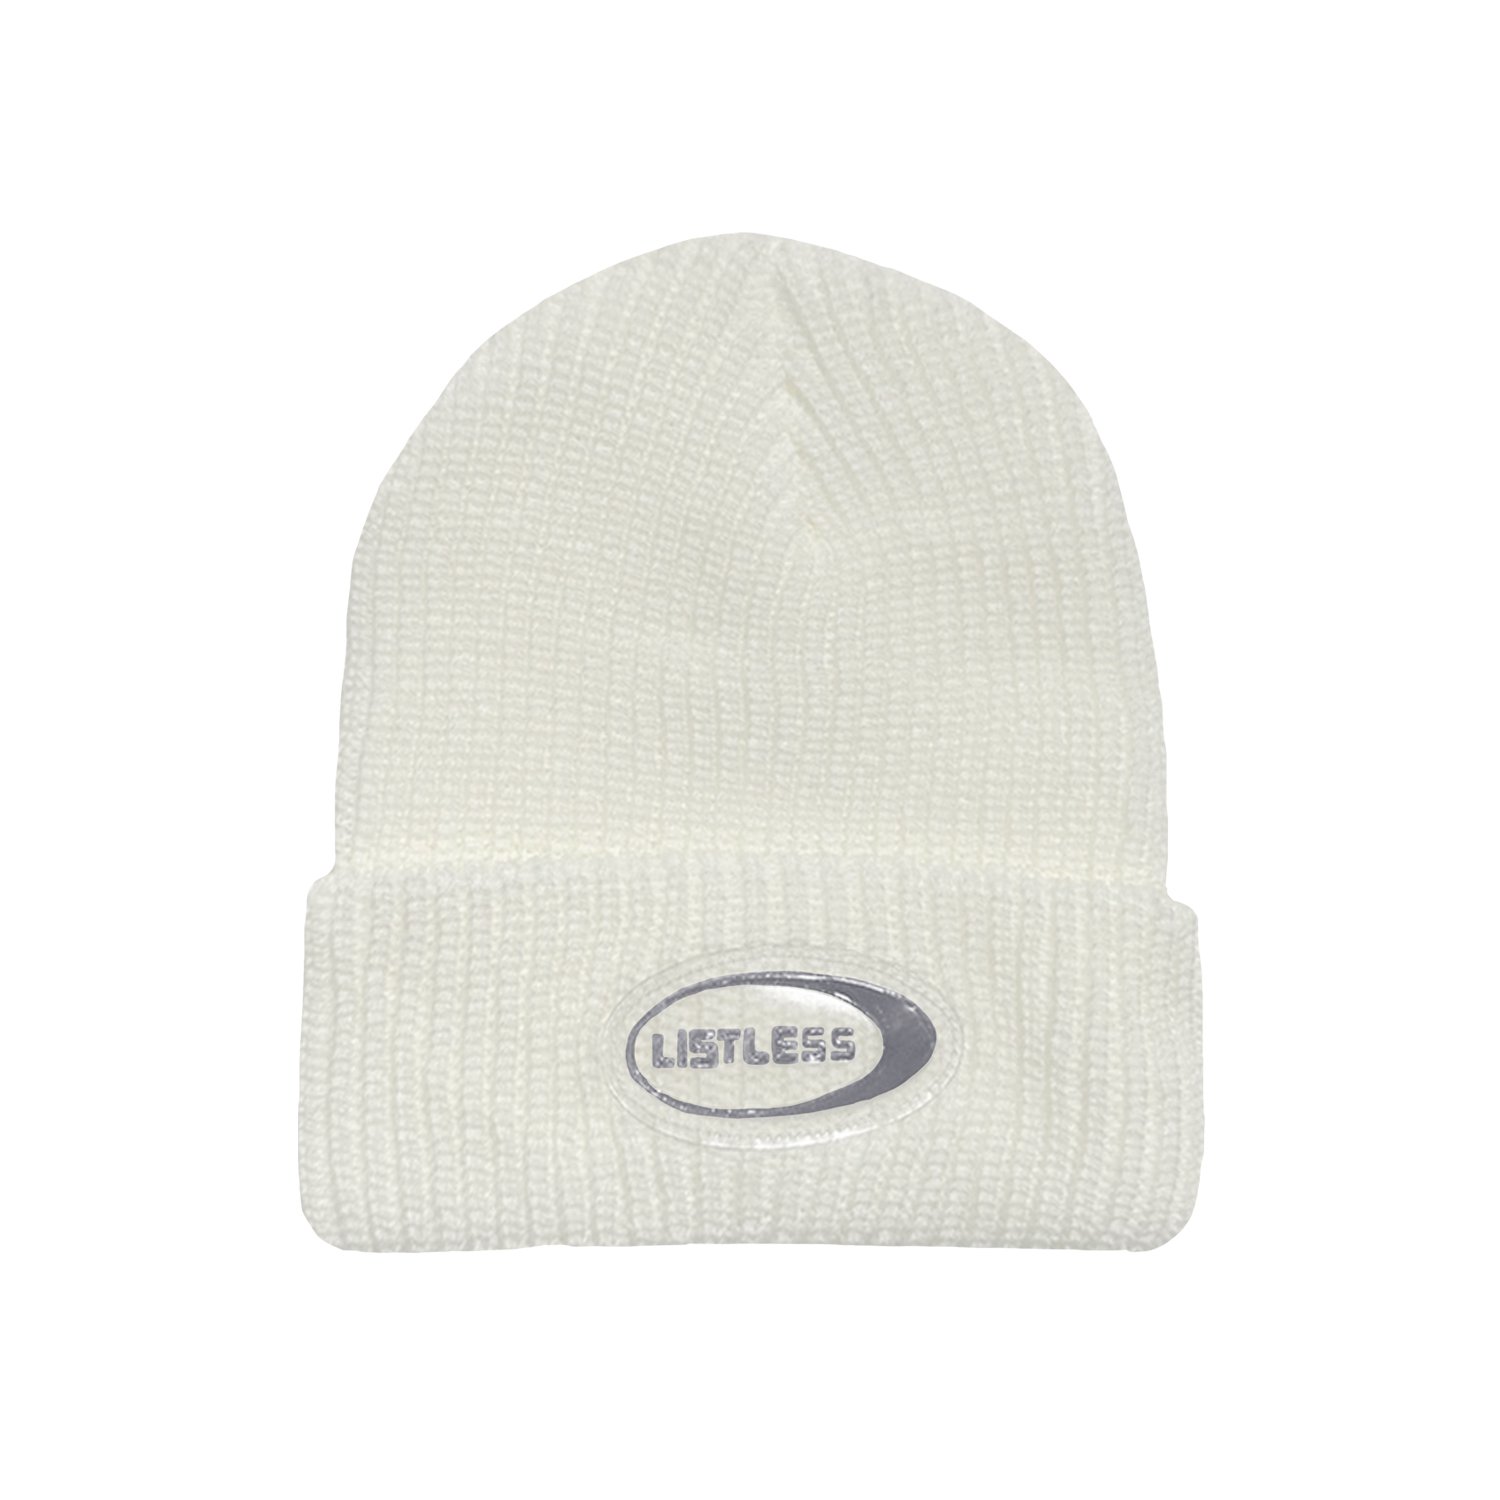 <img class='new_mark_img1' src='https://img.shop-pro.jp/img/new/icons2.gif' style='border:none;display:inline;margin:0px;padding:0px;width:auto;' />LISTLESS - soft knit hat（WHITE）